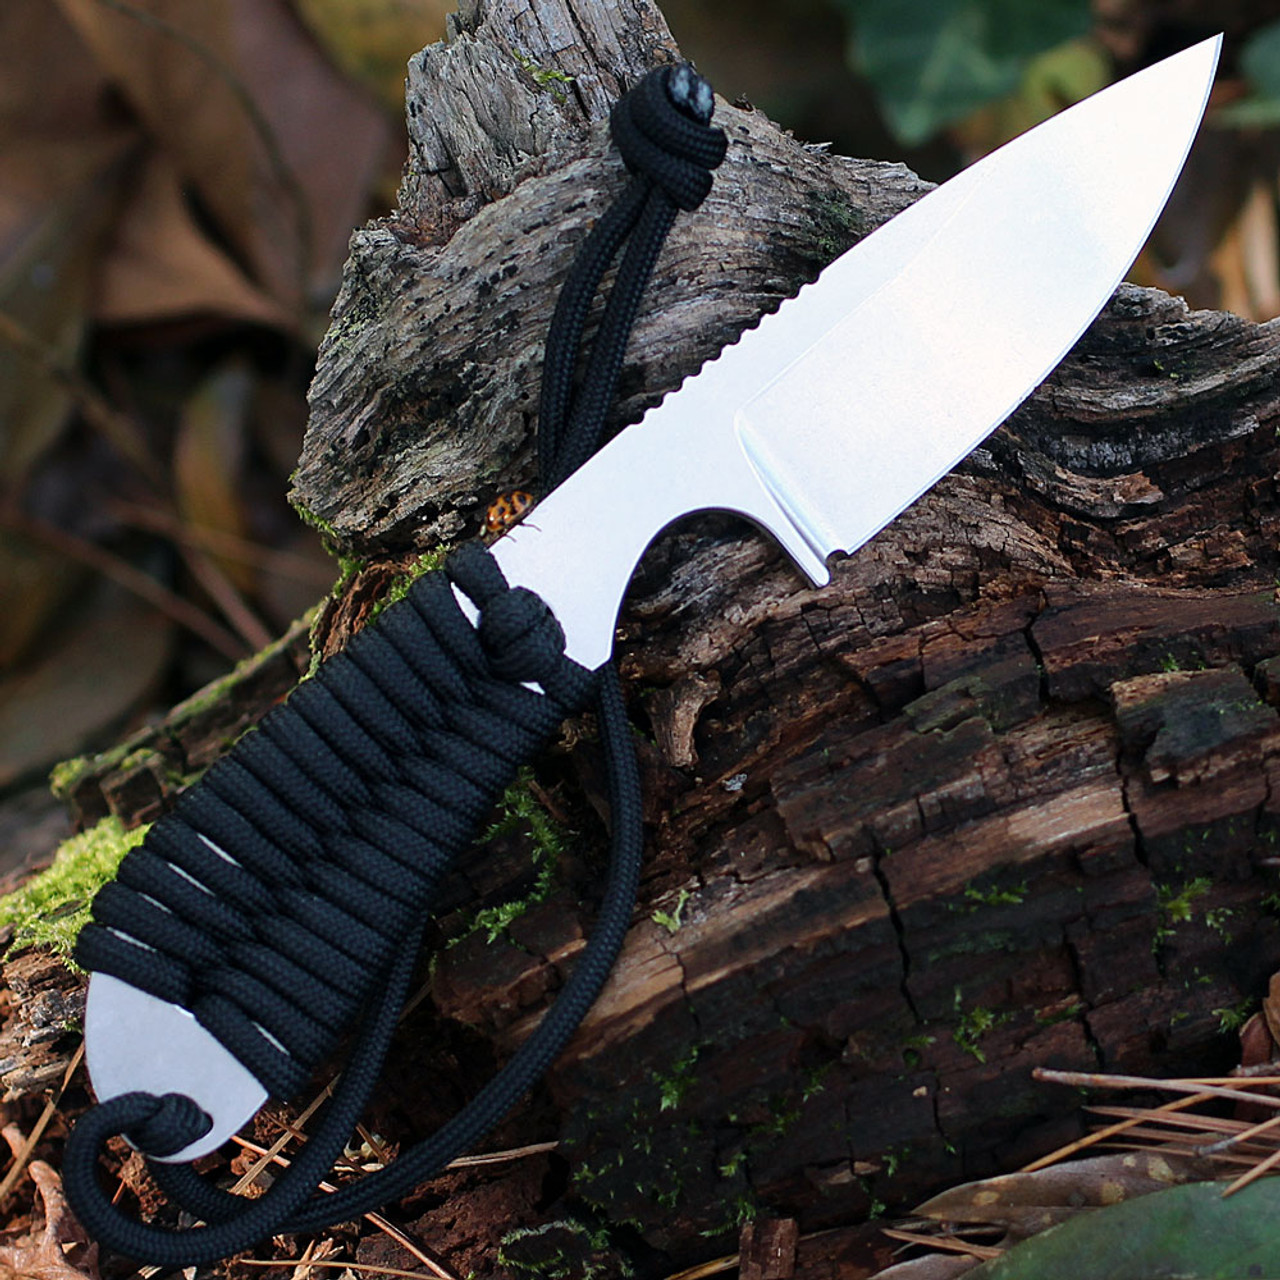 White River M1 BackPacker Fixed Blade (WRM1-PBL) - 3.0in CPM-S35VN Stonewash Drop Point Plain Blade, Black Paracord wraped handle - Kydex Sheath